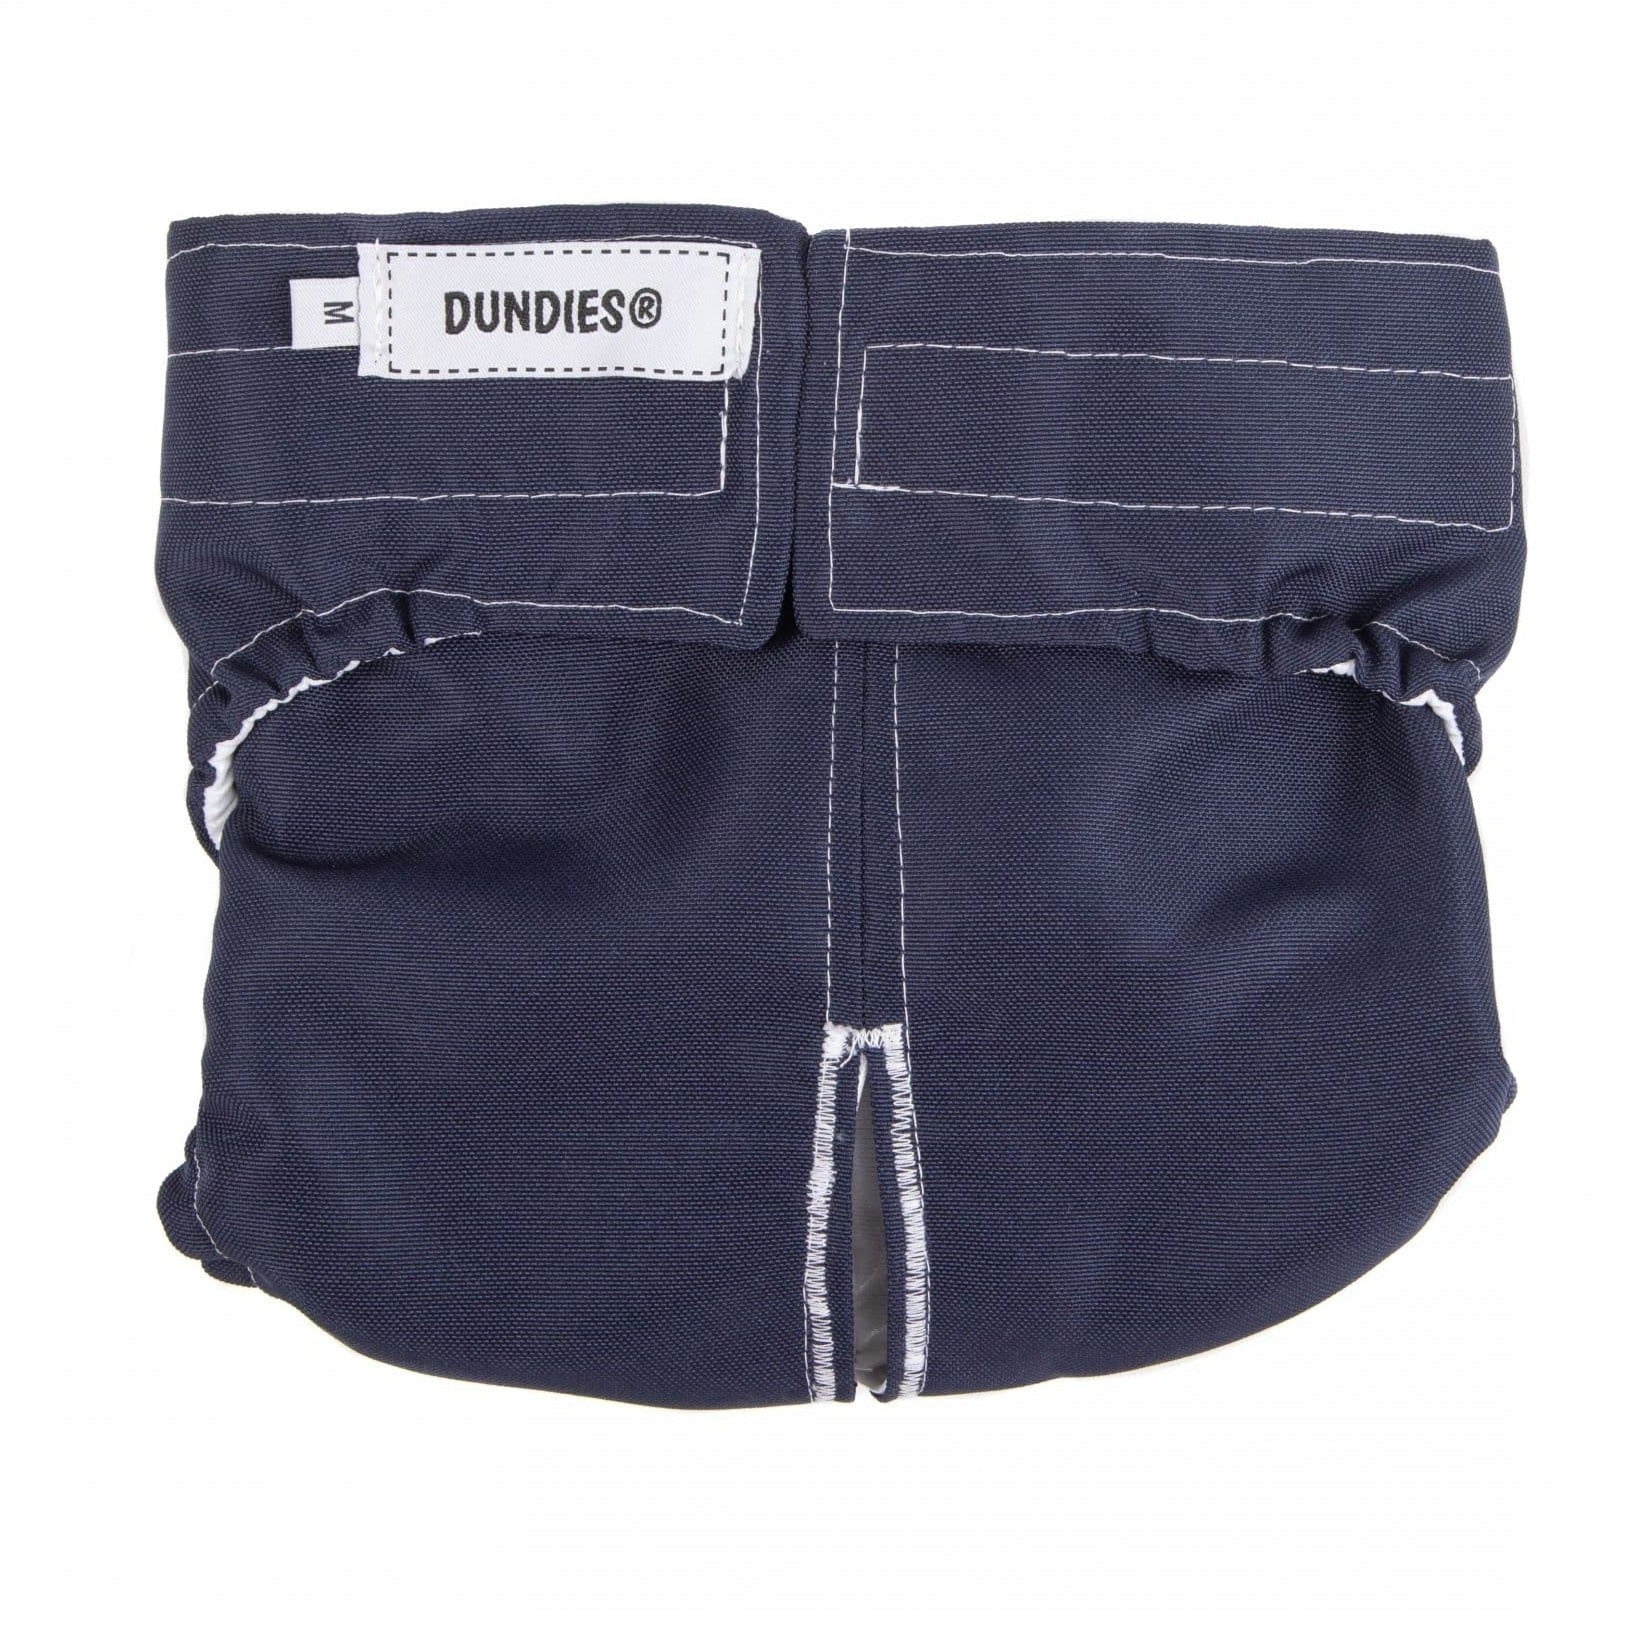 Dundies Navy All In One Nappy (AIO)-Dundies Australia - Vet Recommended Pet Nappies